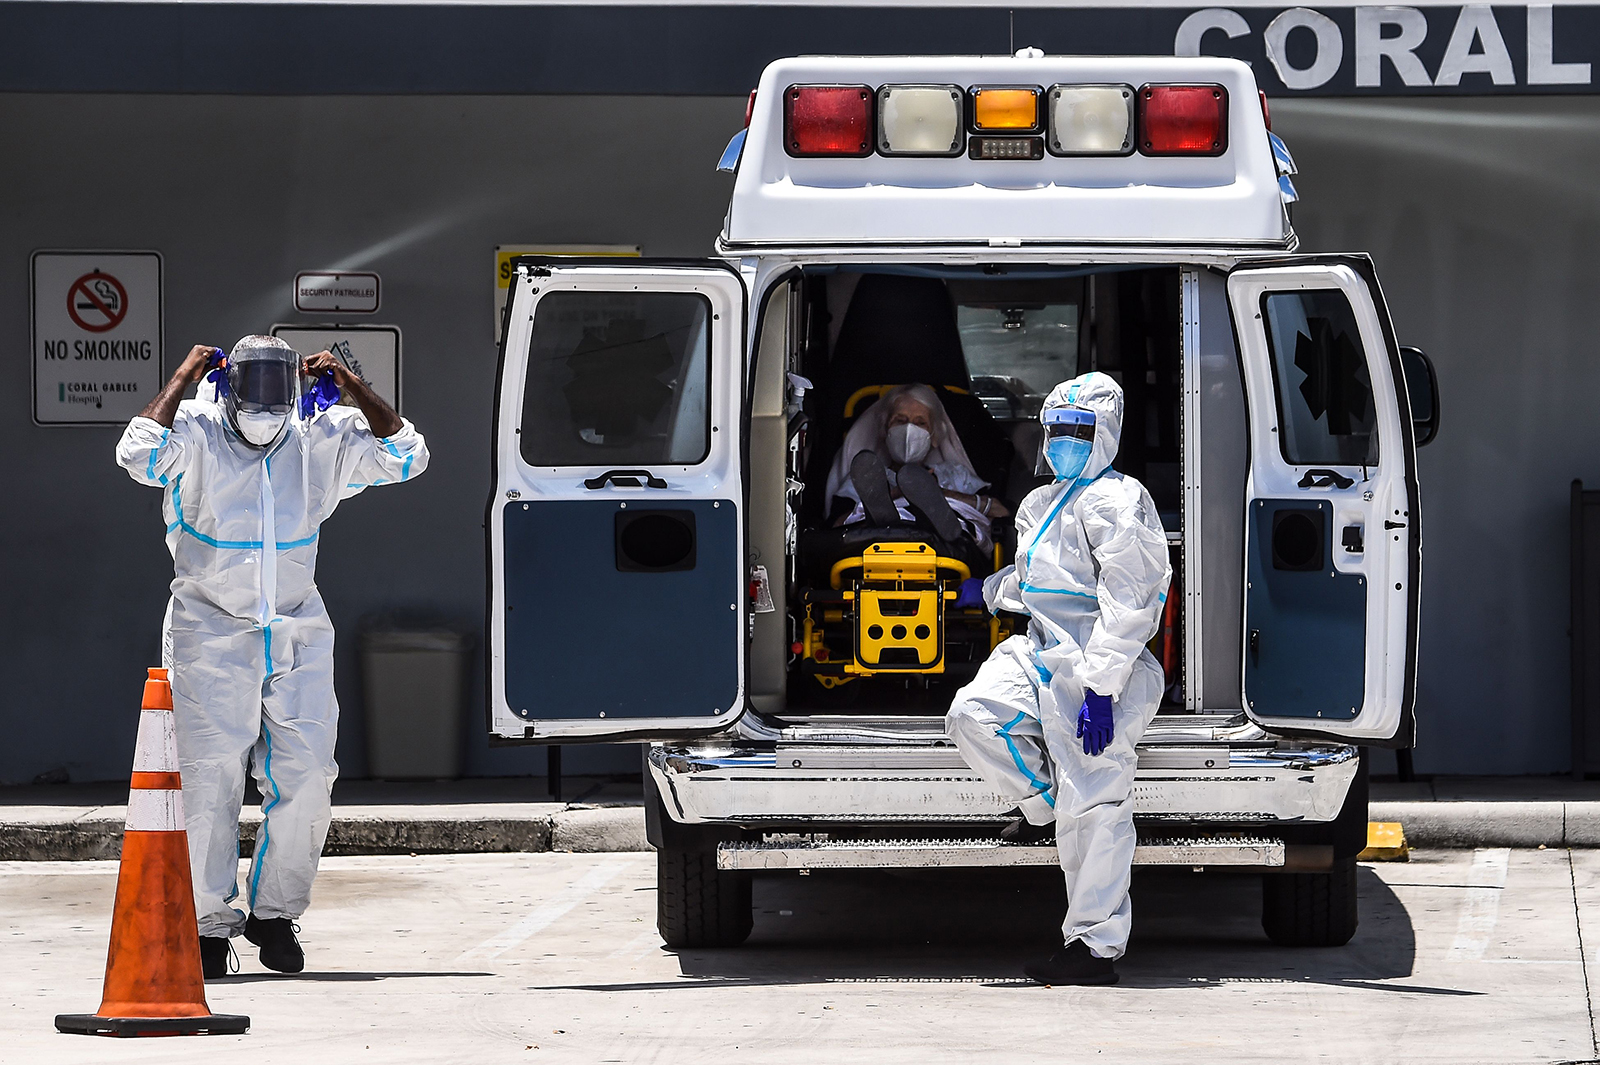 Medics prepares to transfer a patient on a stretcher from an ambulance outside of Emergency at Coral Gables Hospital where Coronavirus patients are treated in Coral Gables near Miami, on July 30.